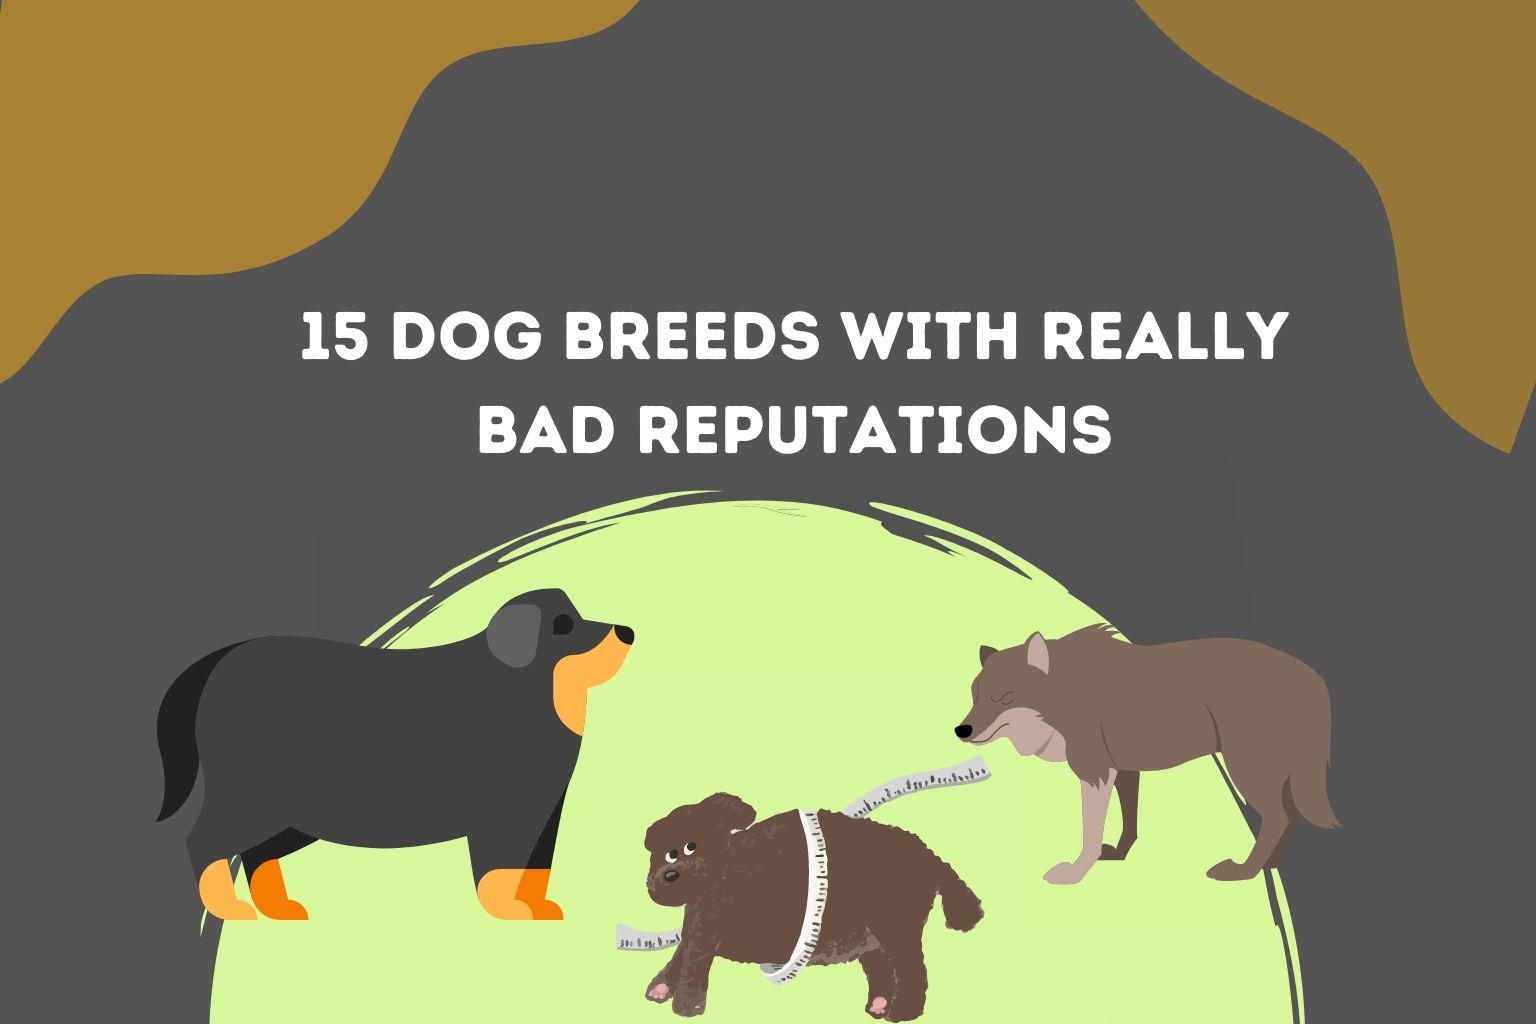 15 Dog Breeds With Really Bad Reputations